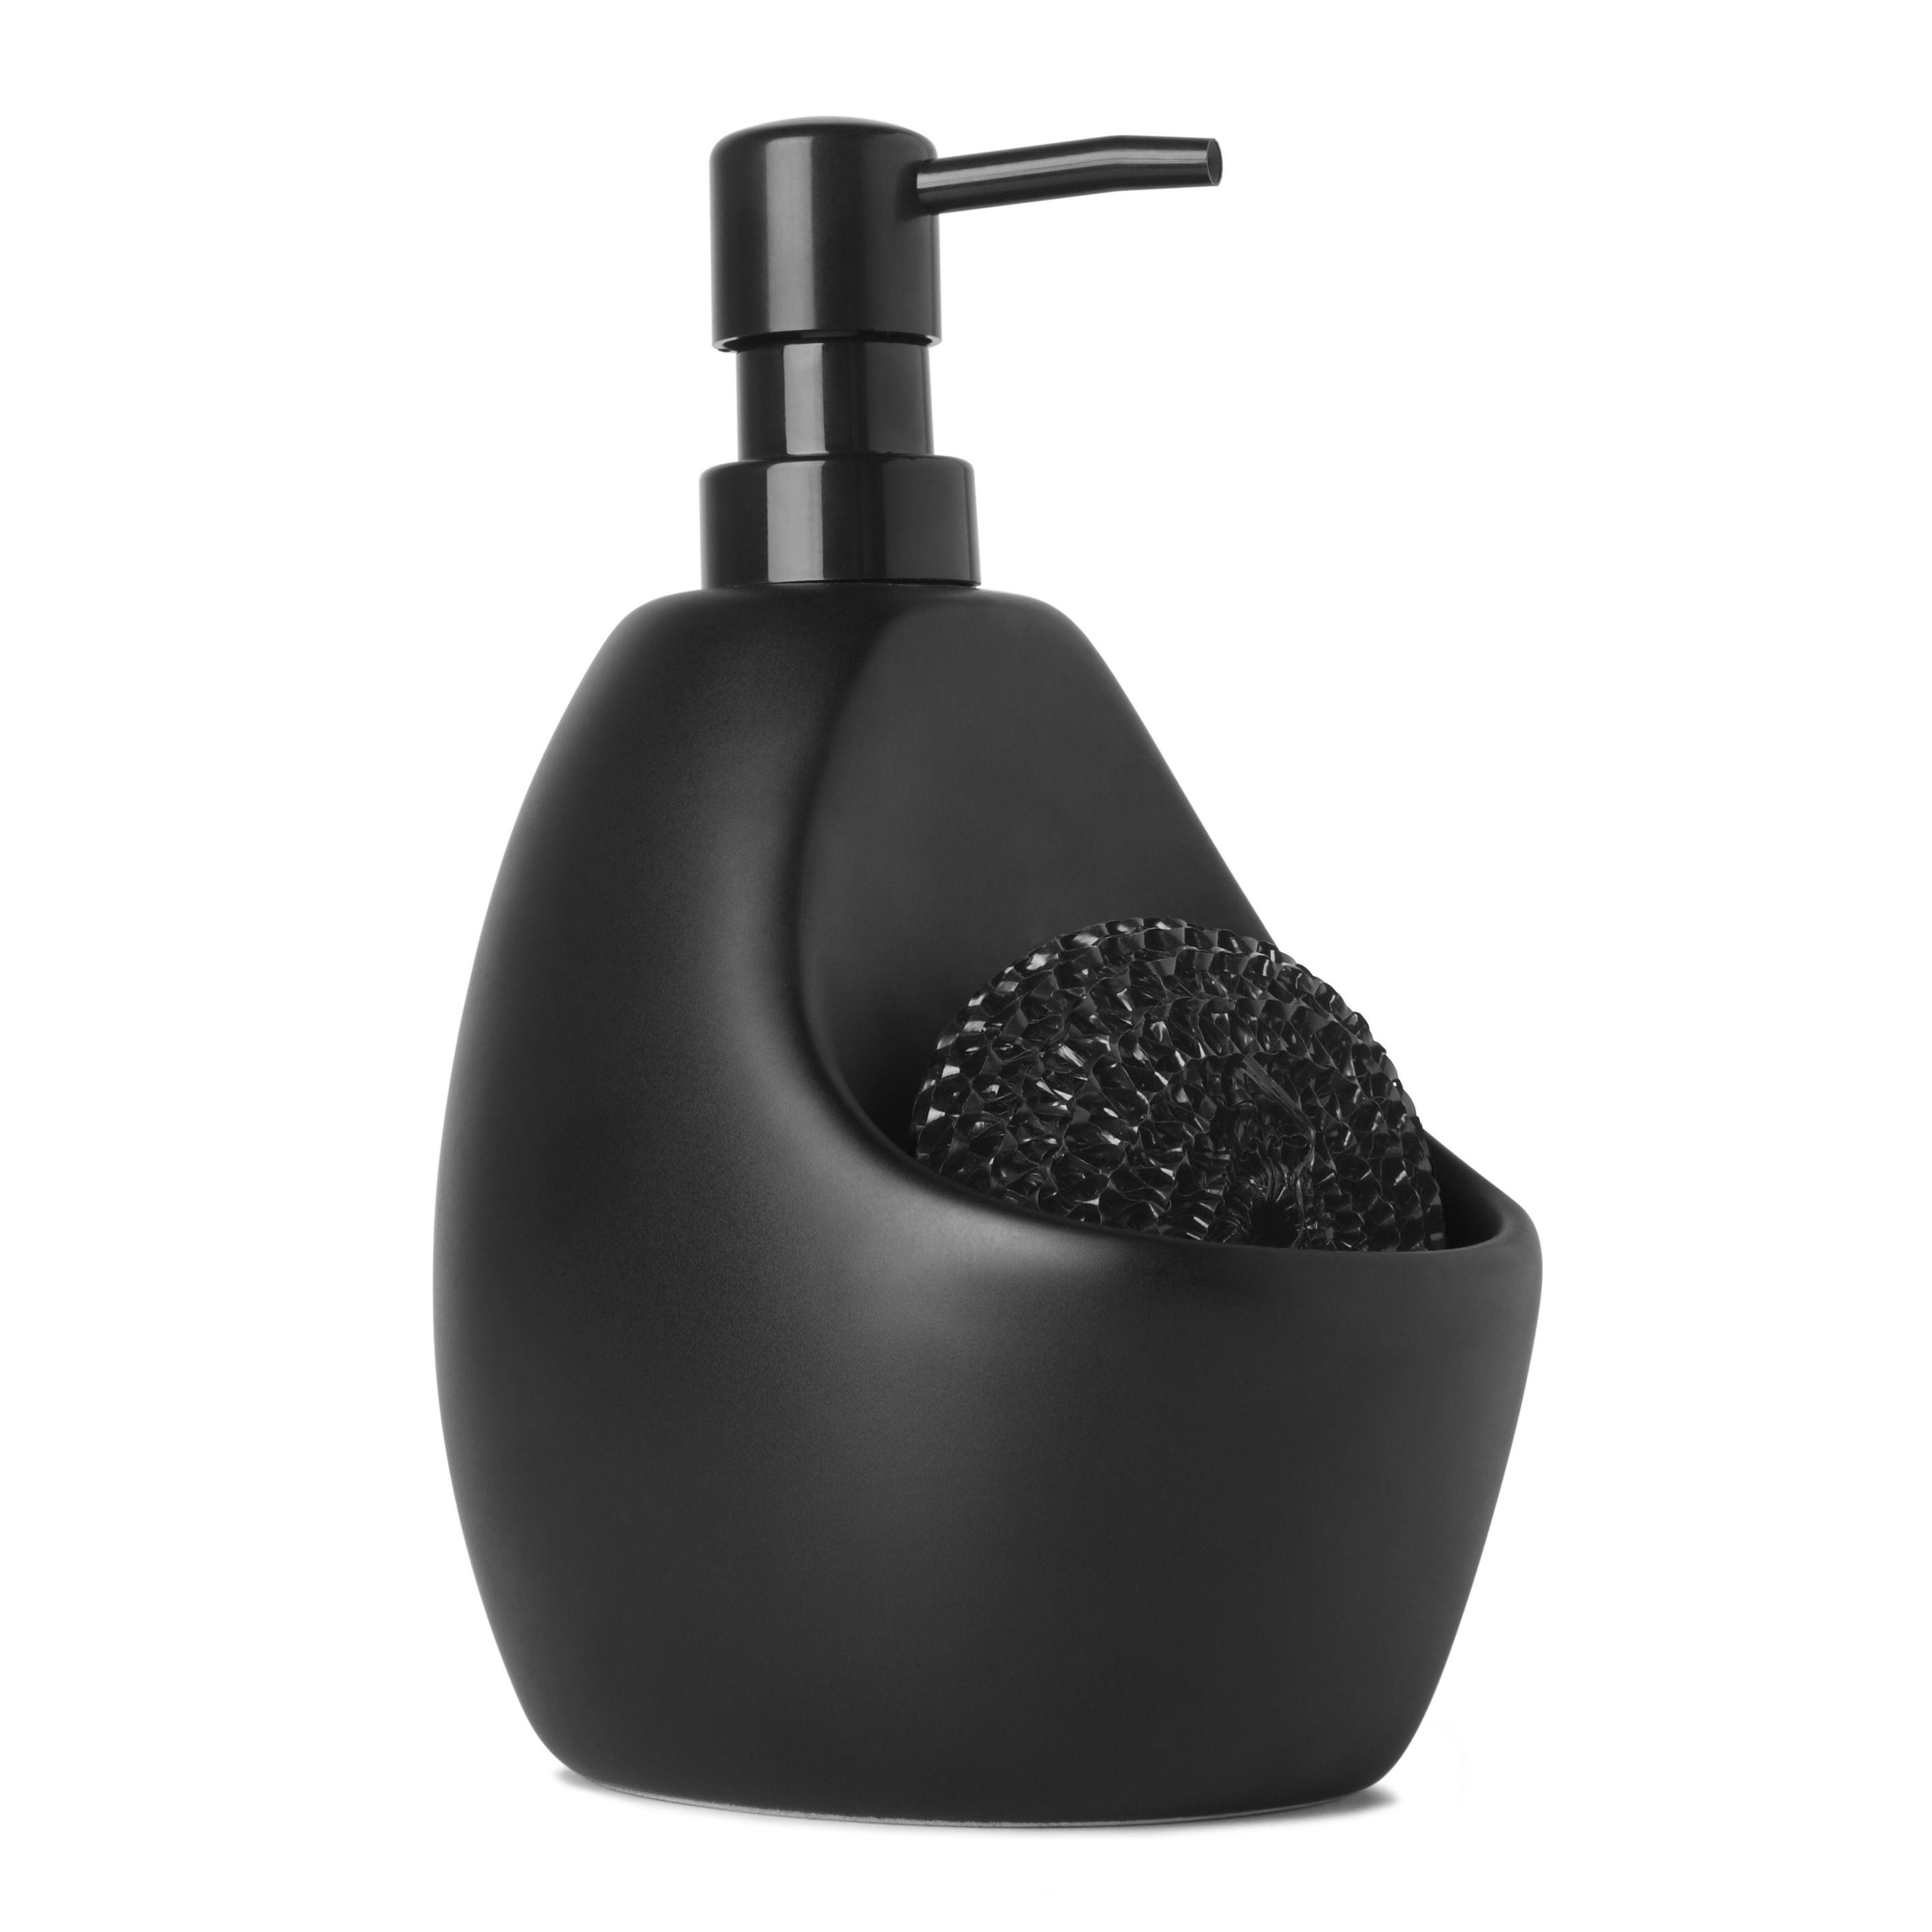 the black soap pump with pouch-shaped spot for round scrub sponge